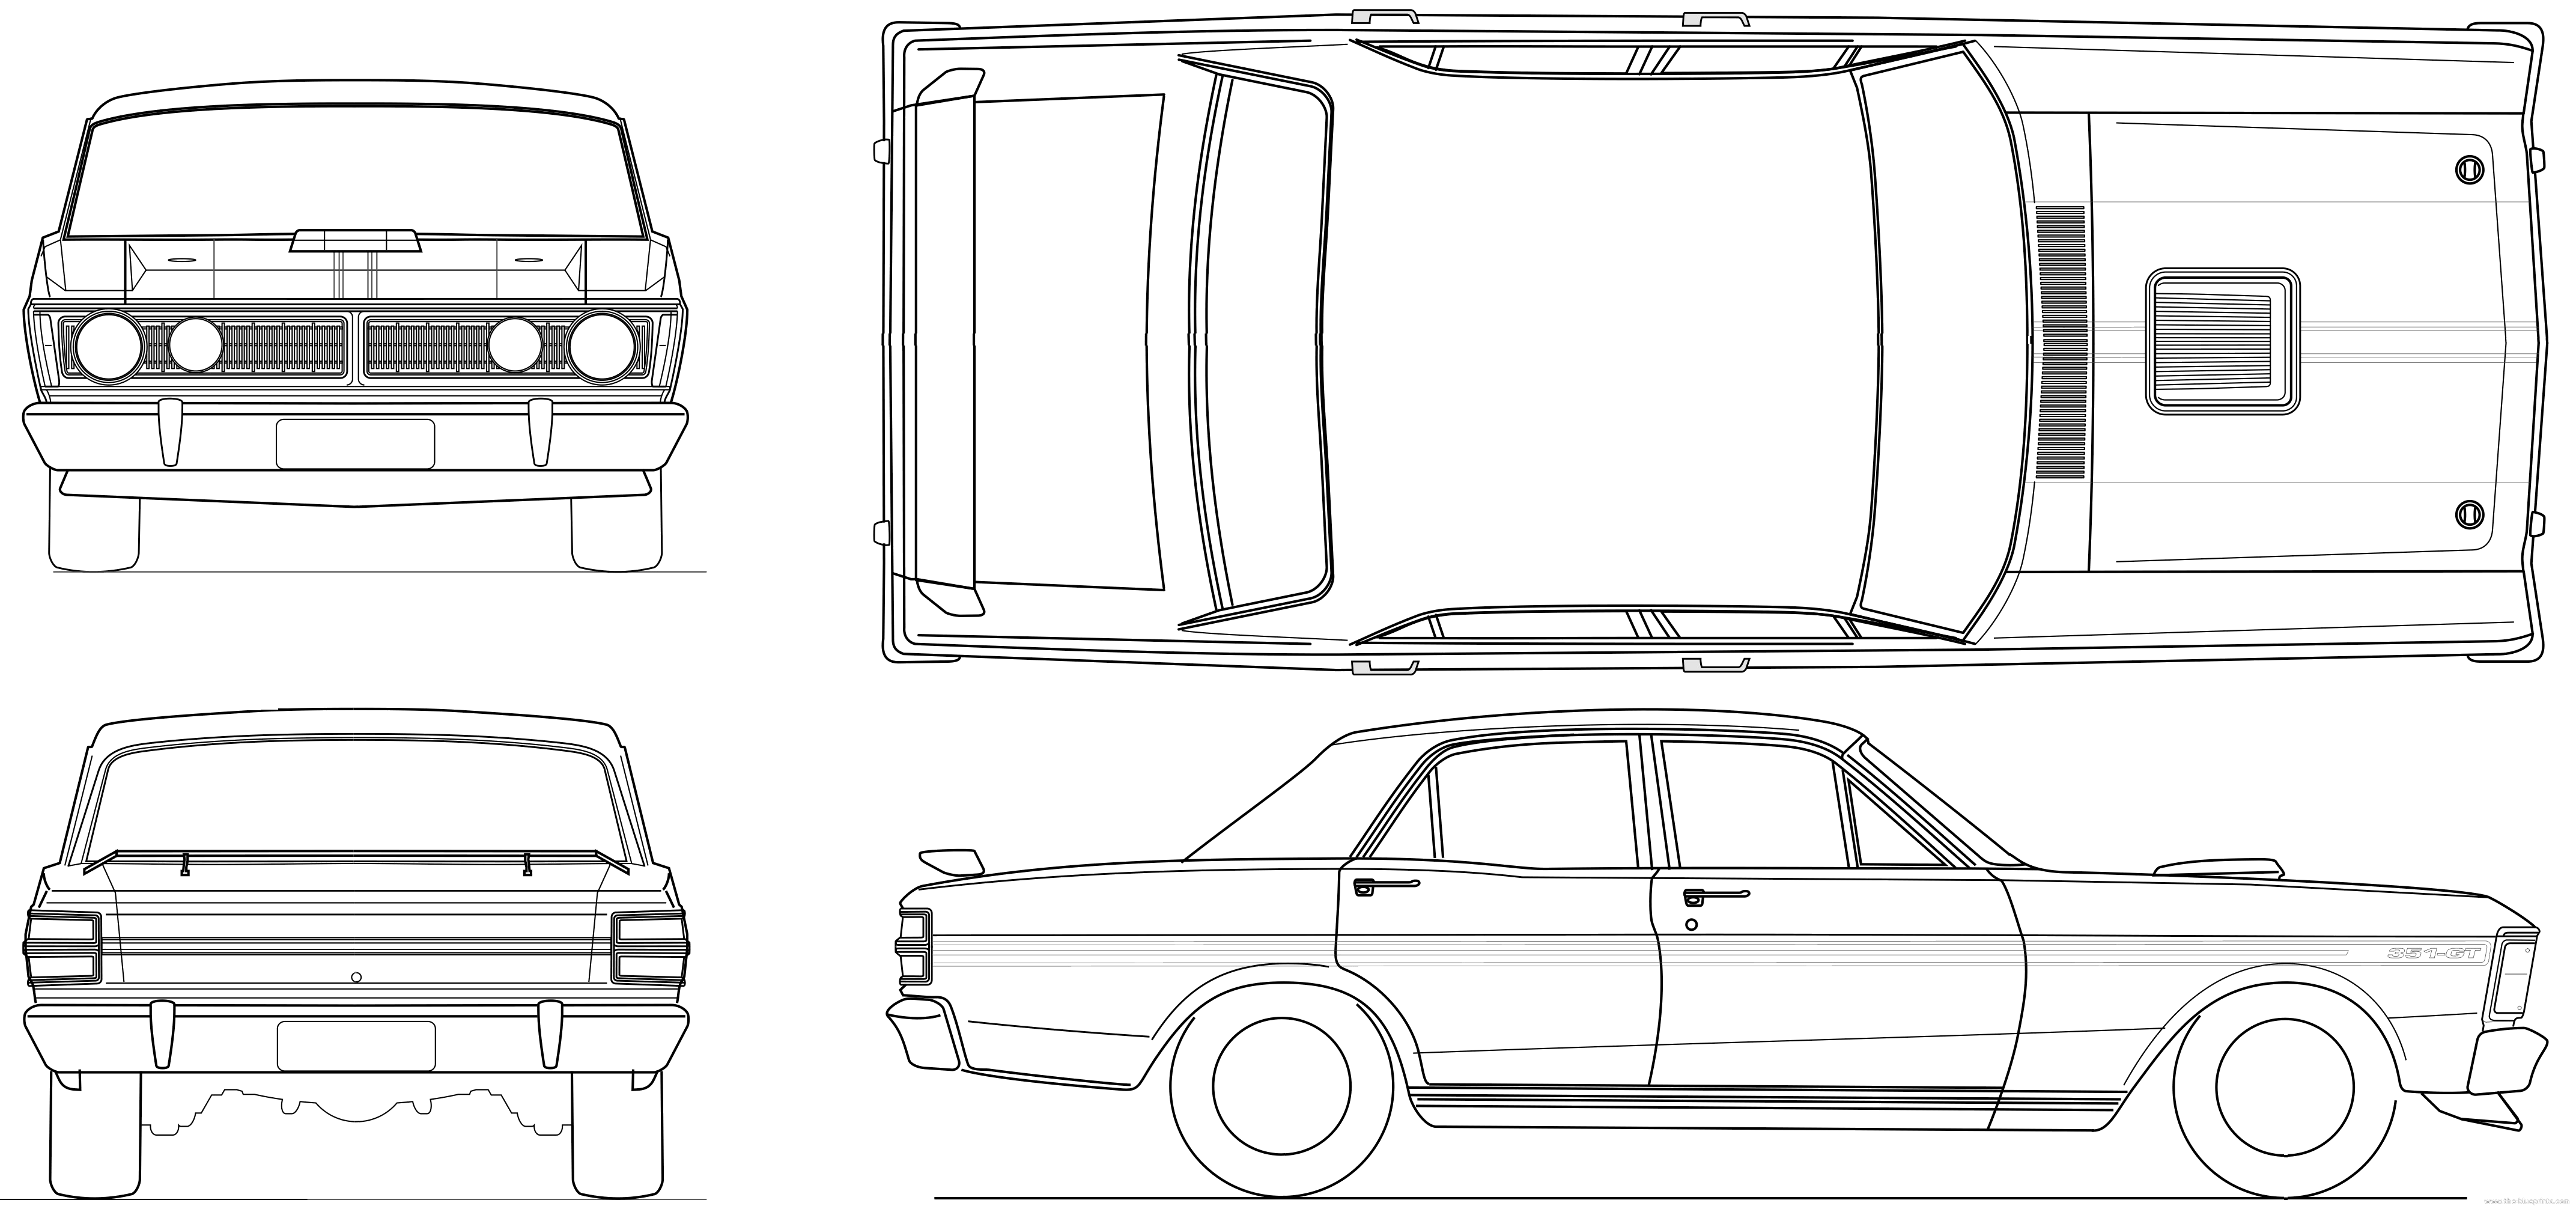 Ford falcon drawing #9